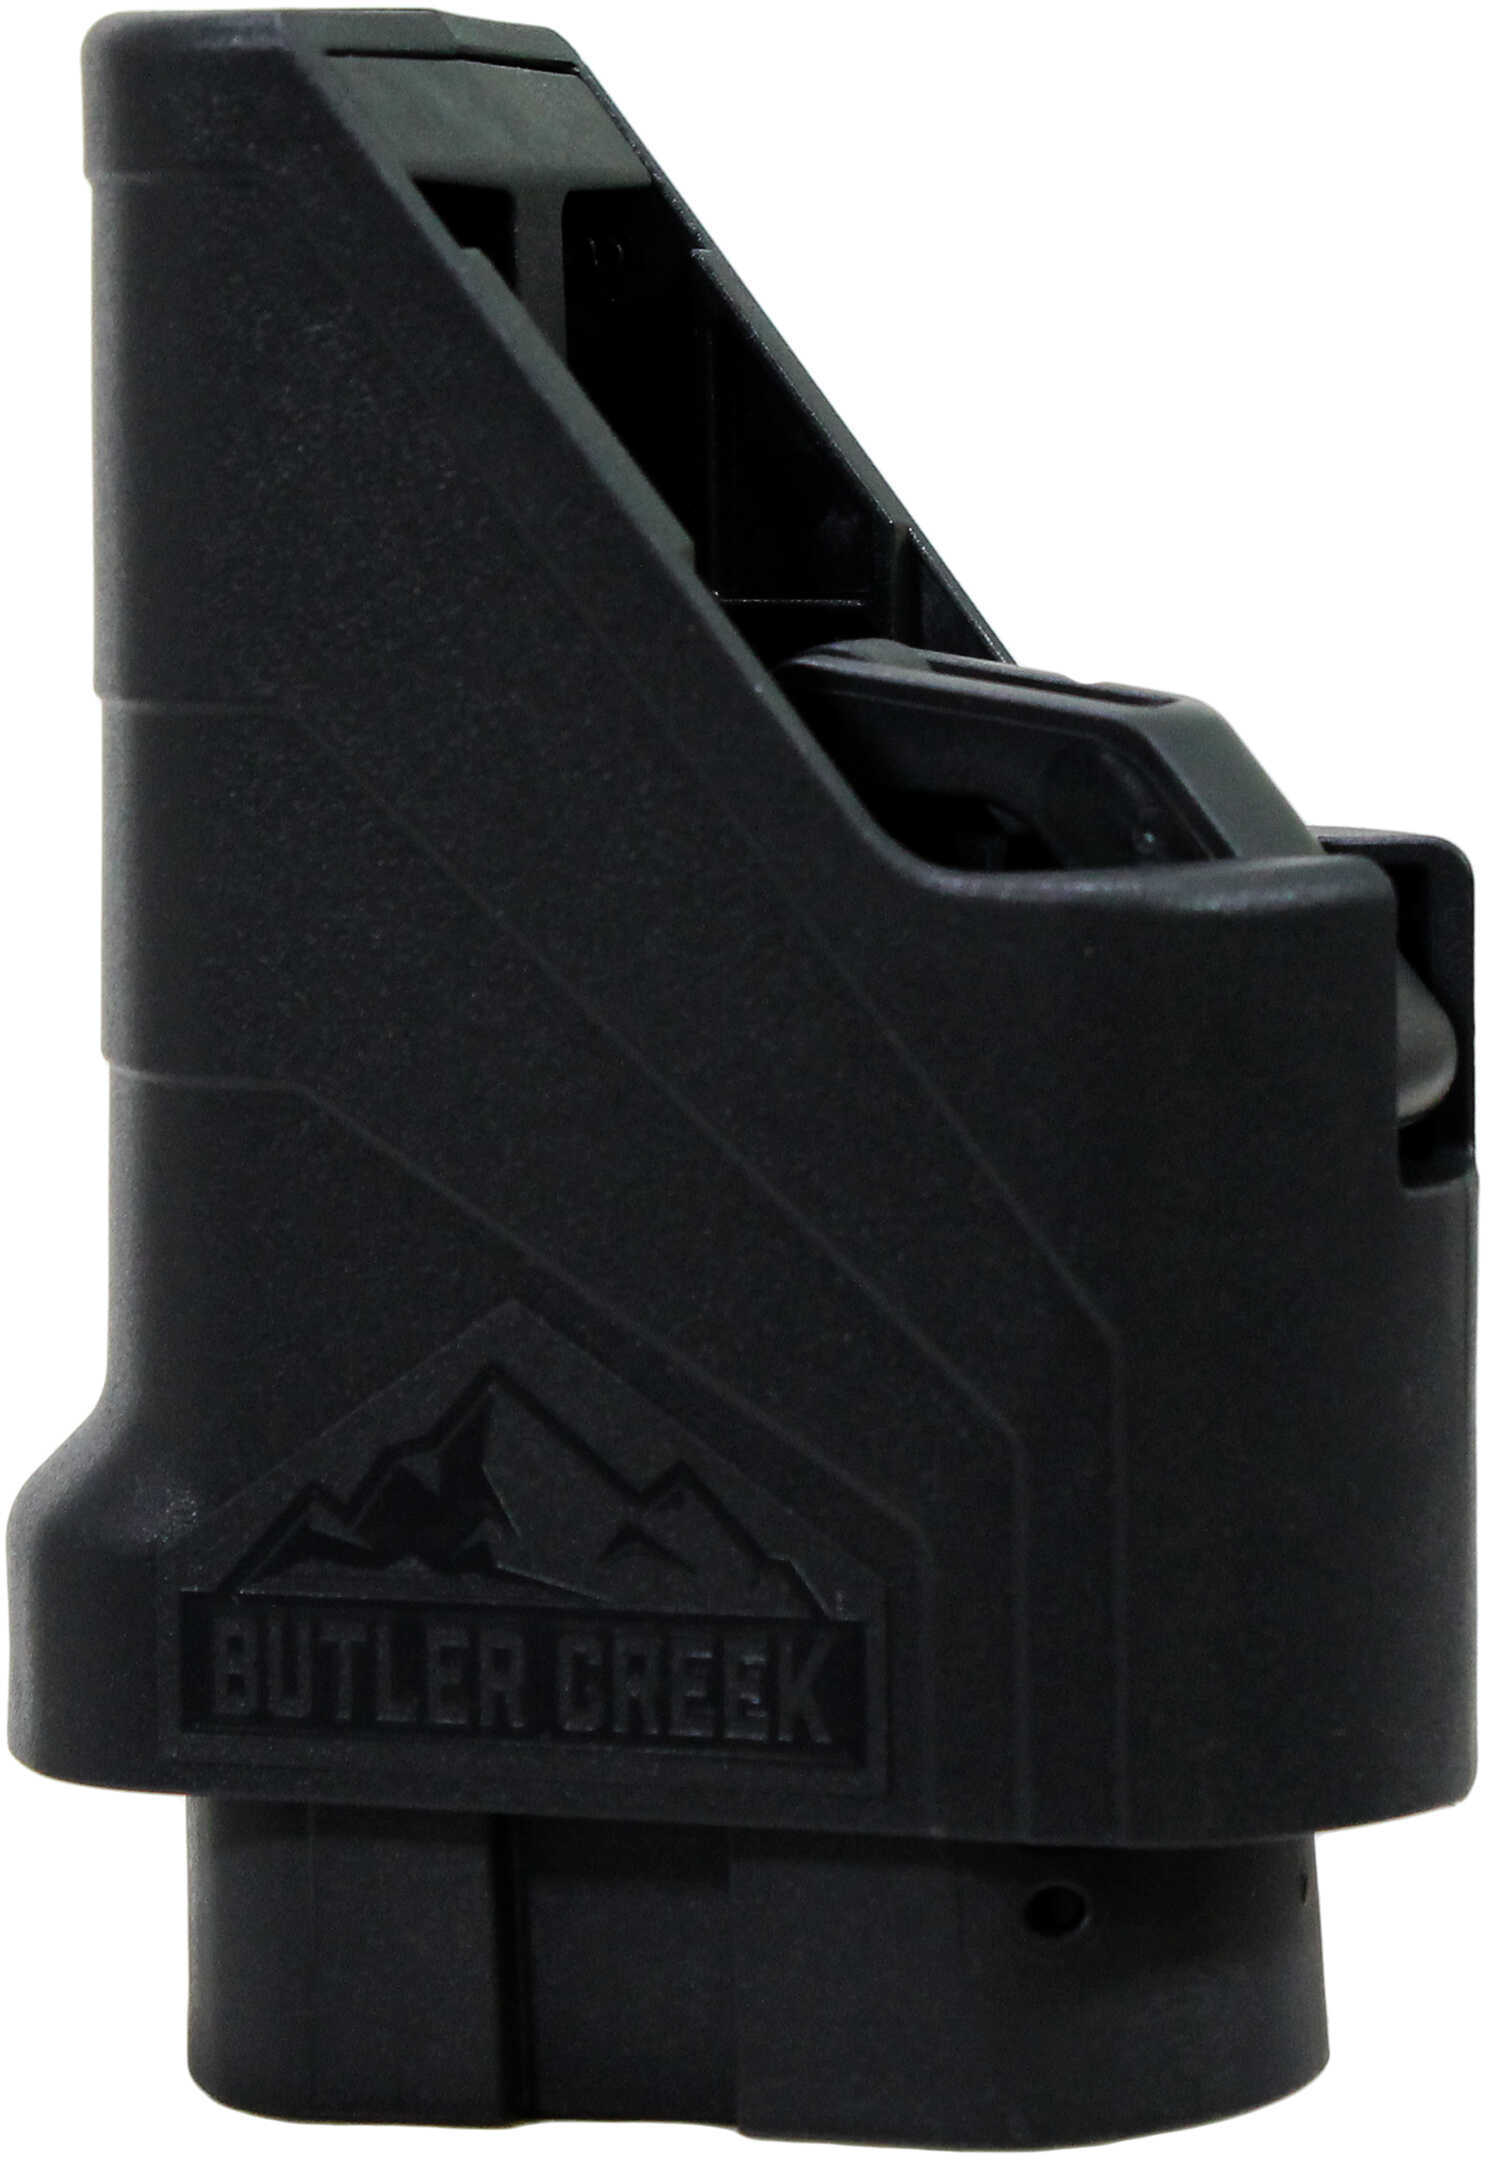 Asap Mag Loader Double Stack 380-45ACP